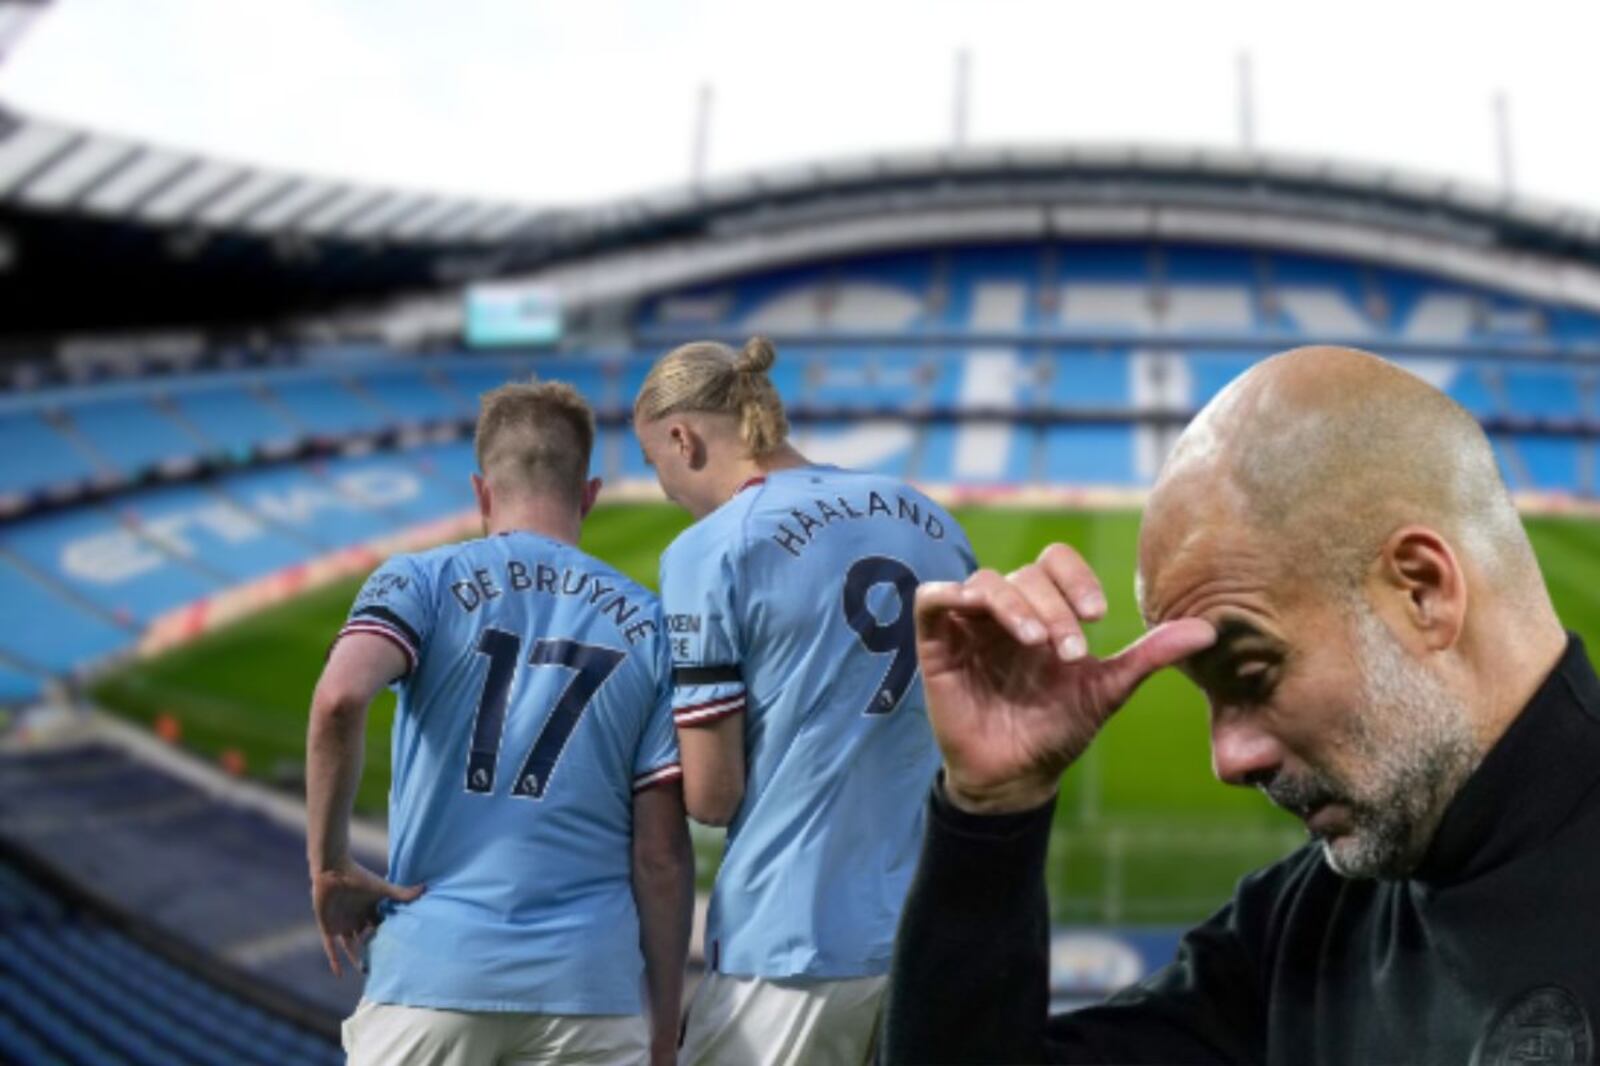 (VIDEO) Worst news for Guardiola, the images that make Man City fans trembles